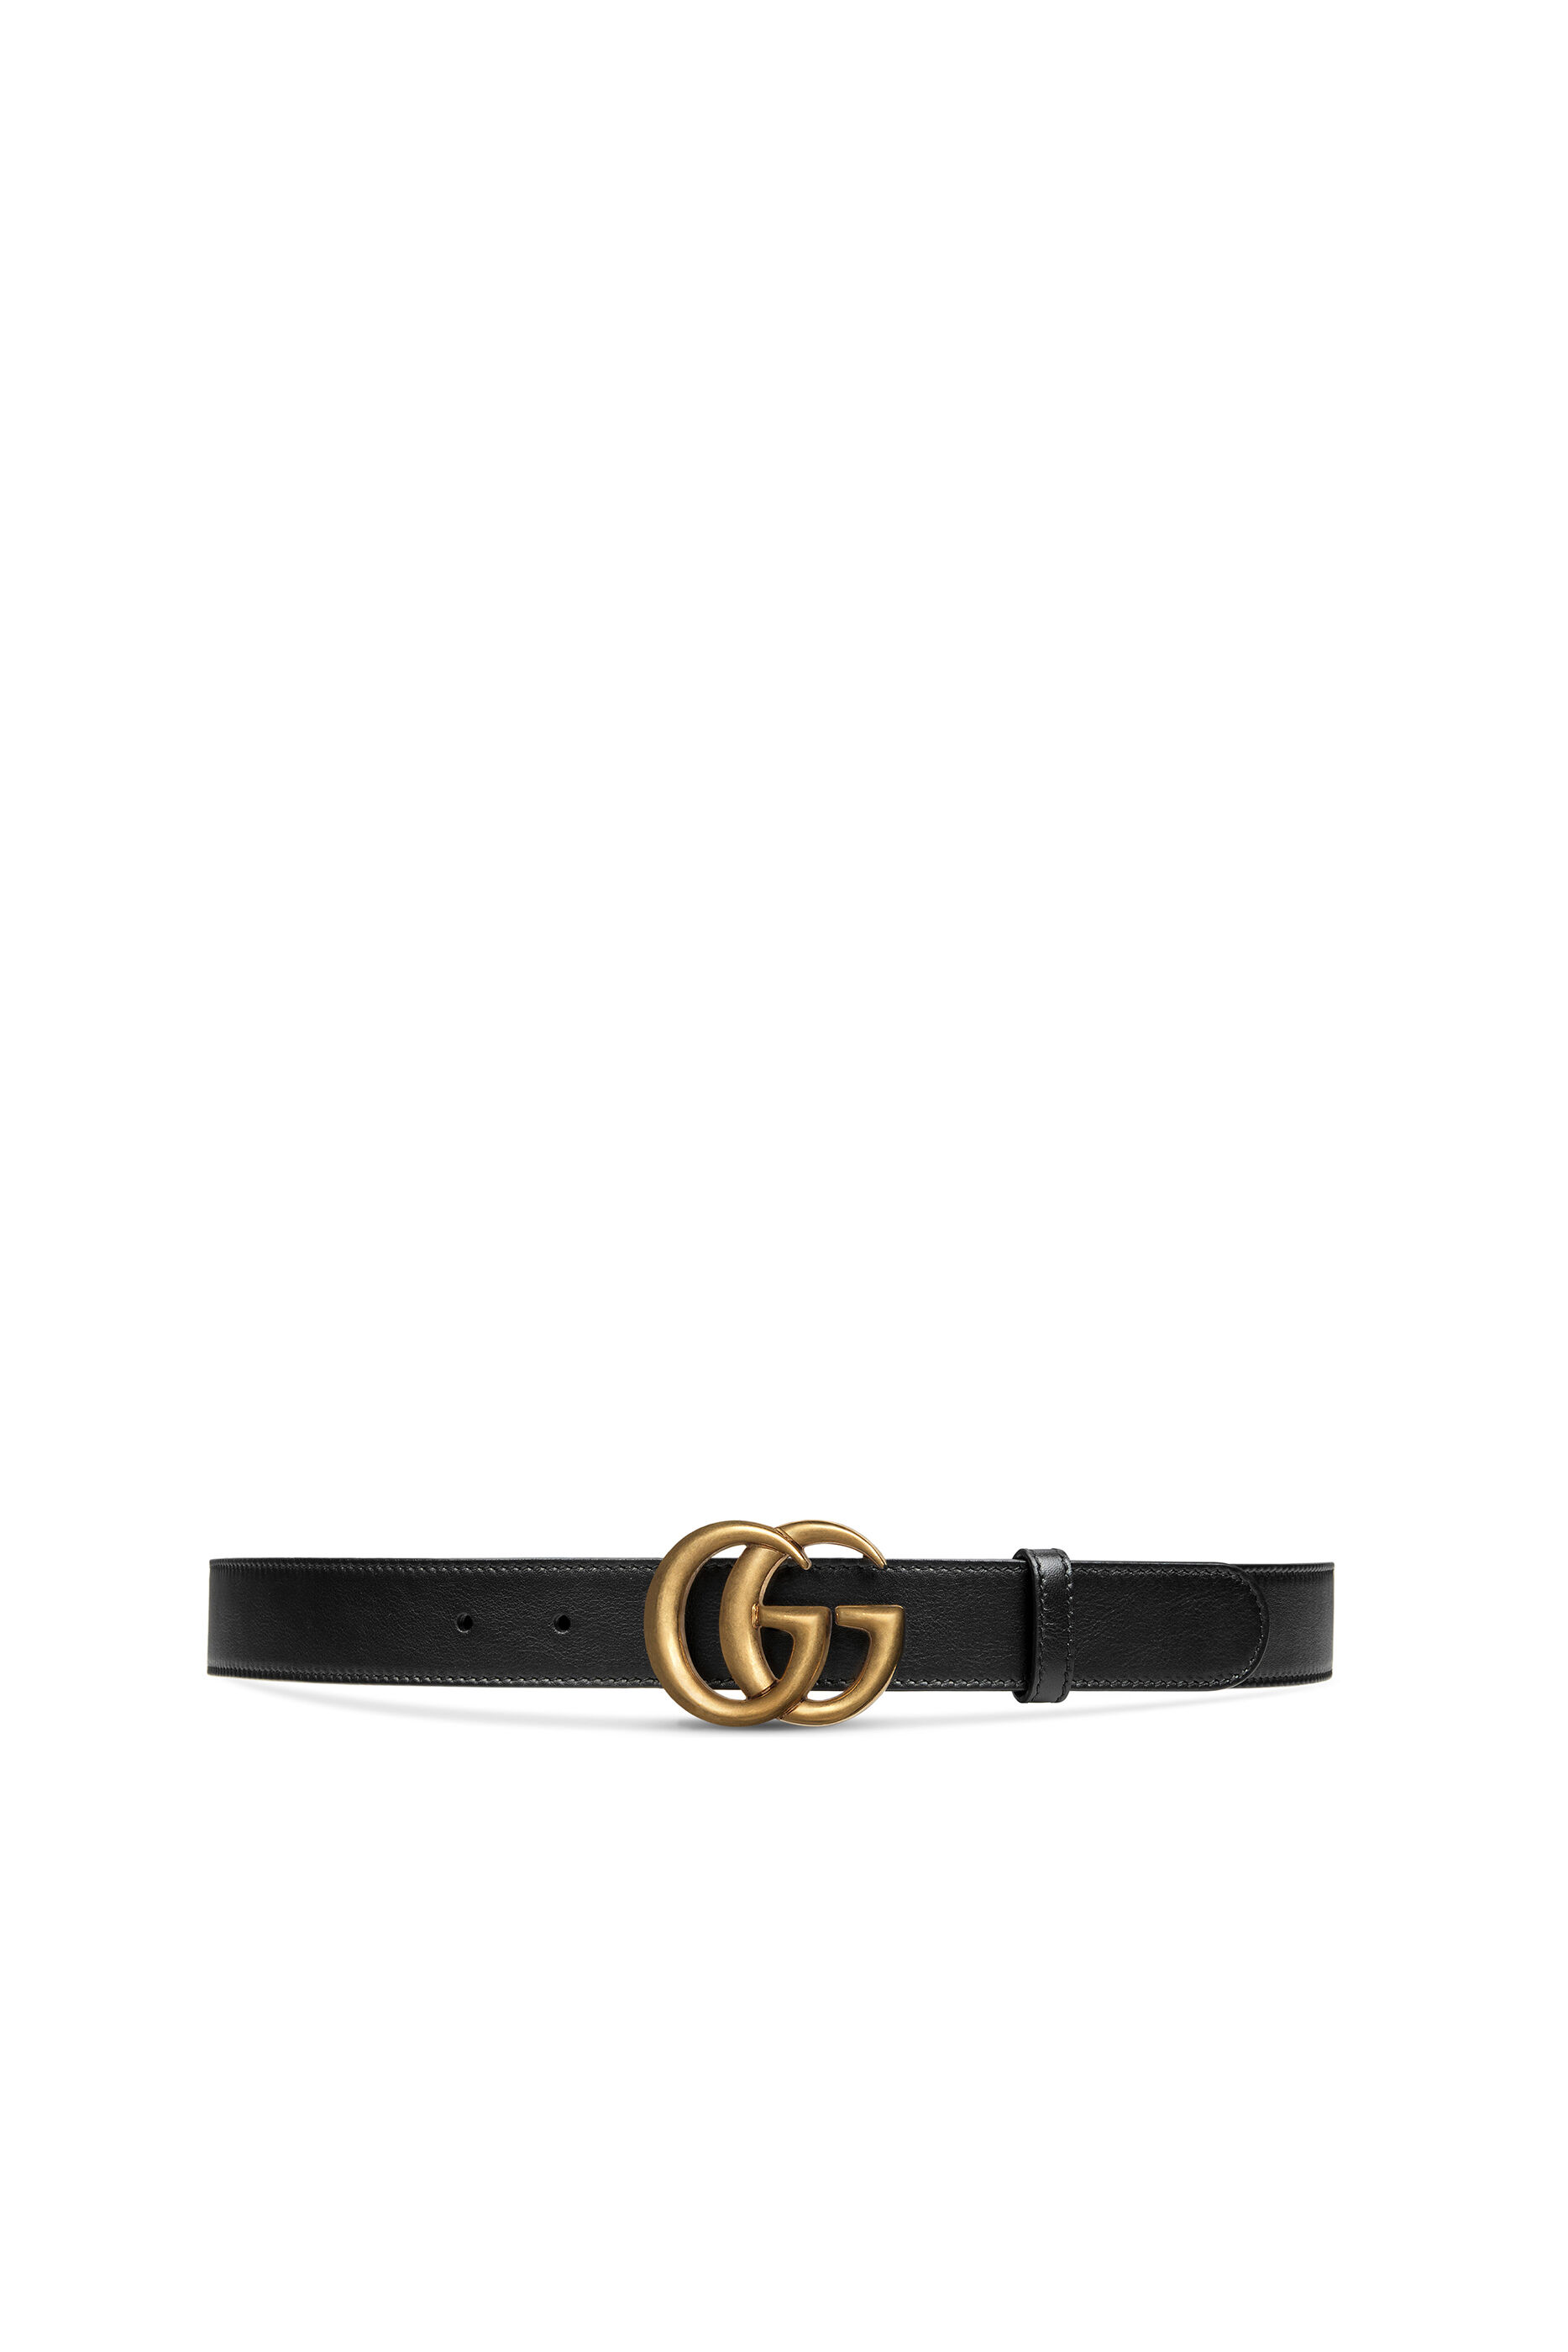 Buy Gucci Double G Leather Belt - Mens 